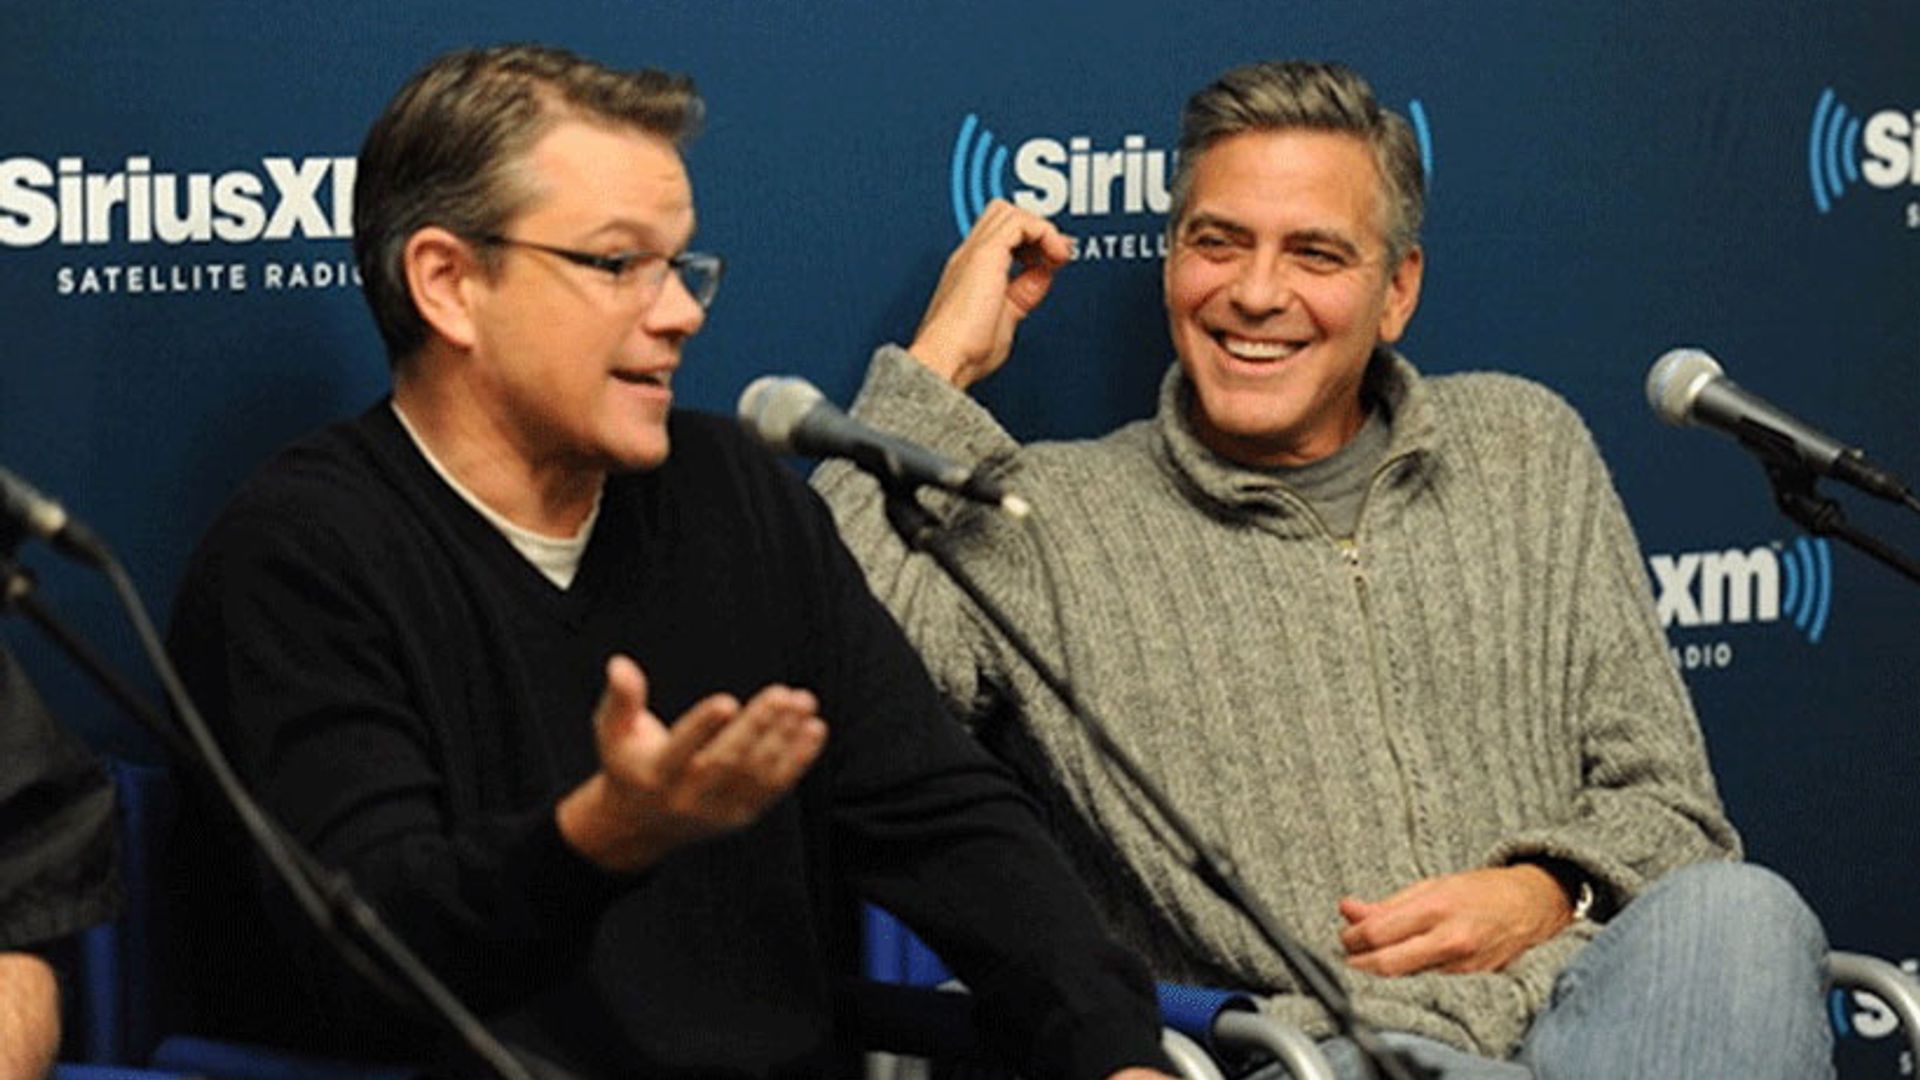 George Clooney's friends are teasing him about being an 'old dad', reveals Matt Damon